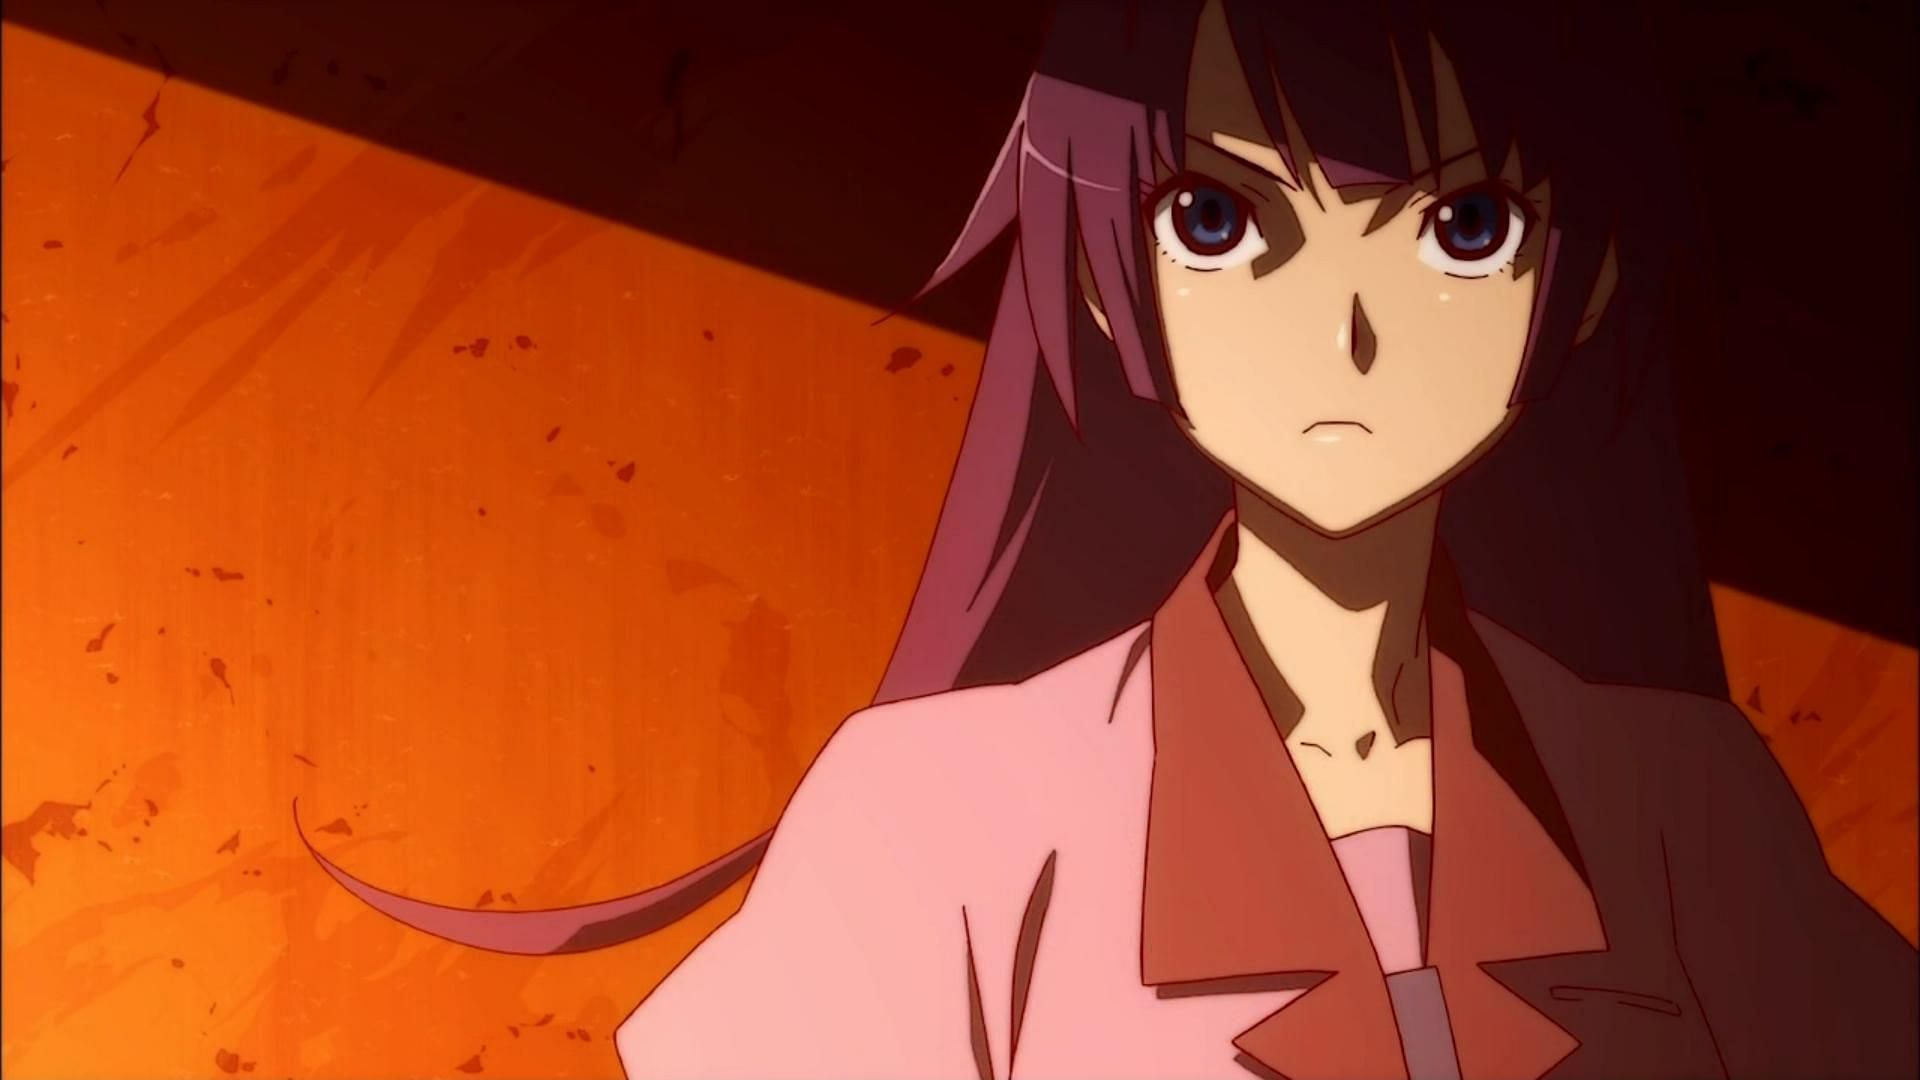 Monogatari: 5 Things From The Anime Franchise That Aged Well (& 5 That Aged  Terribly)